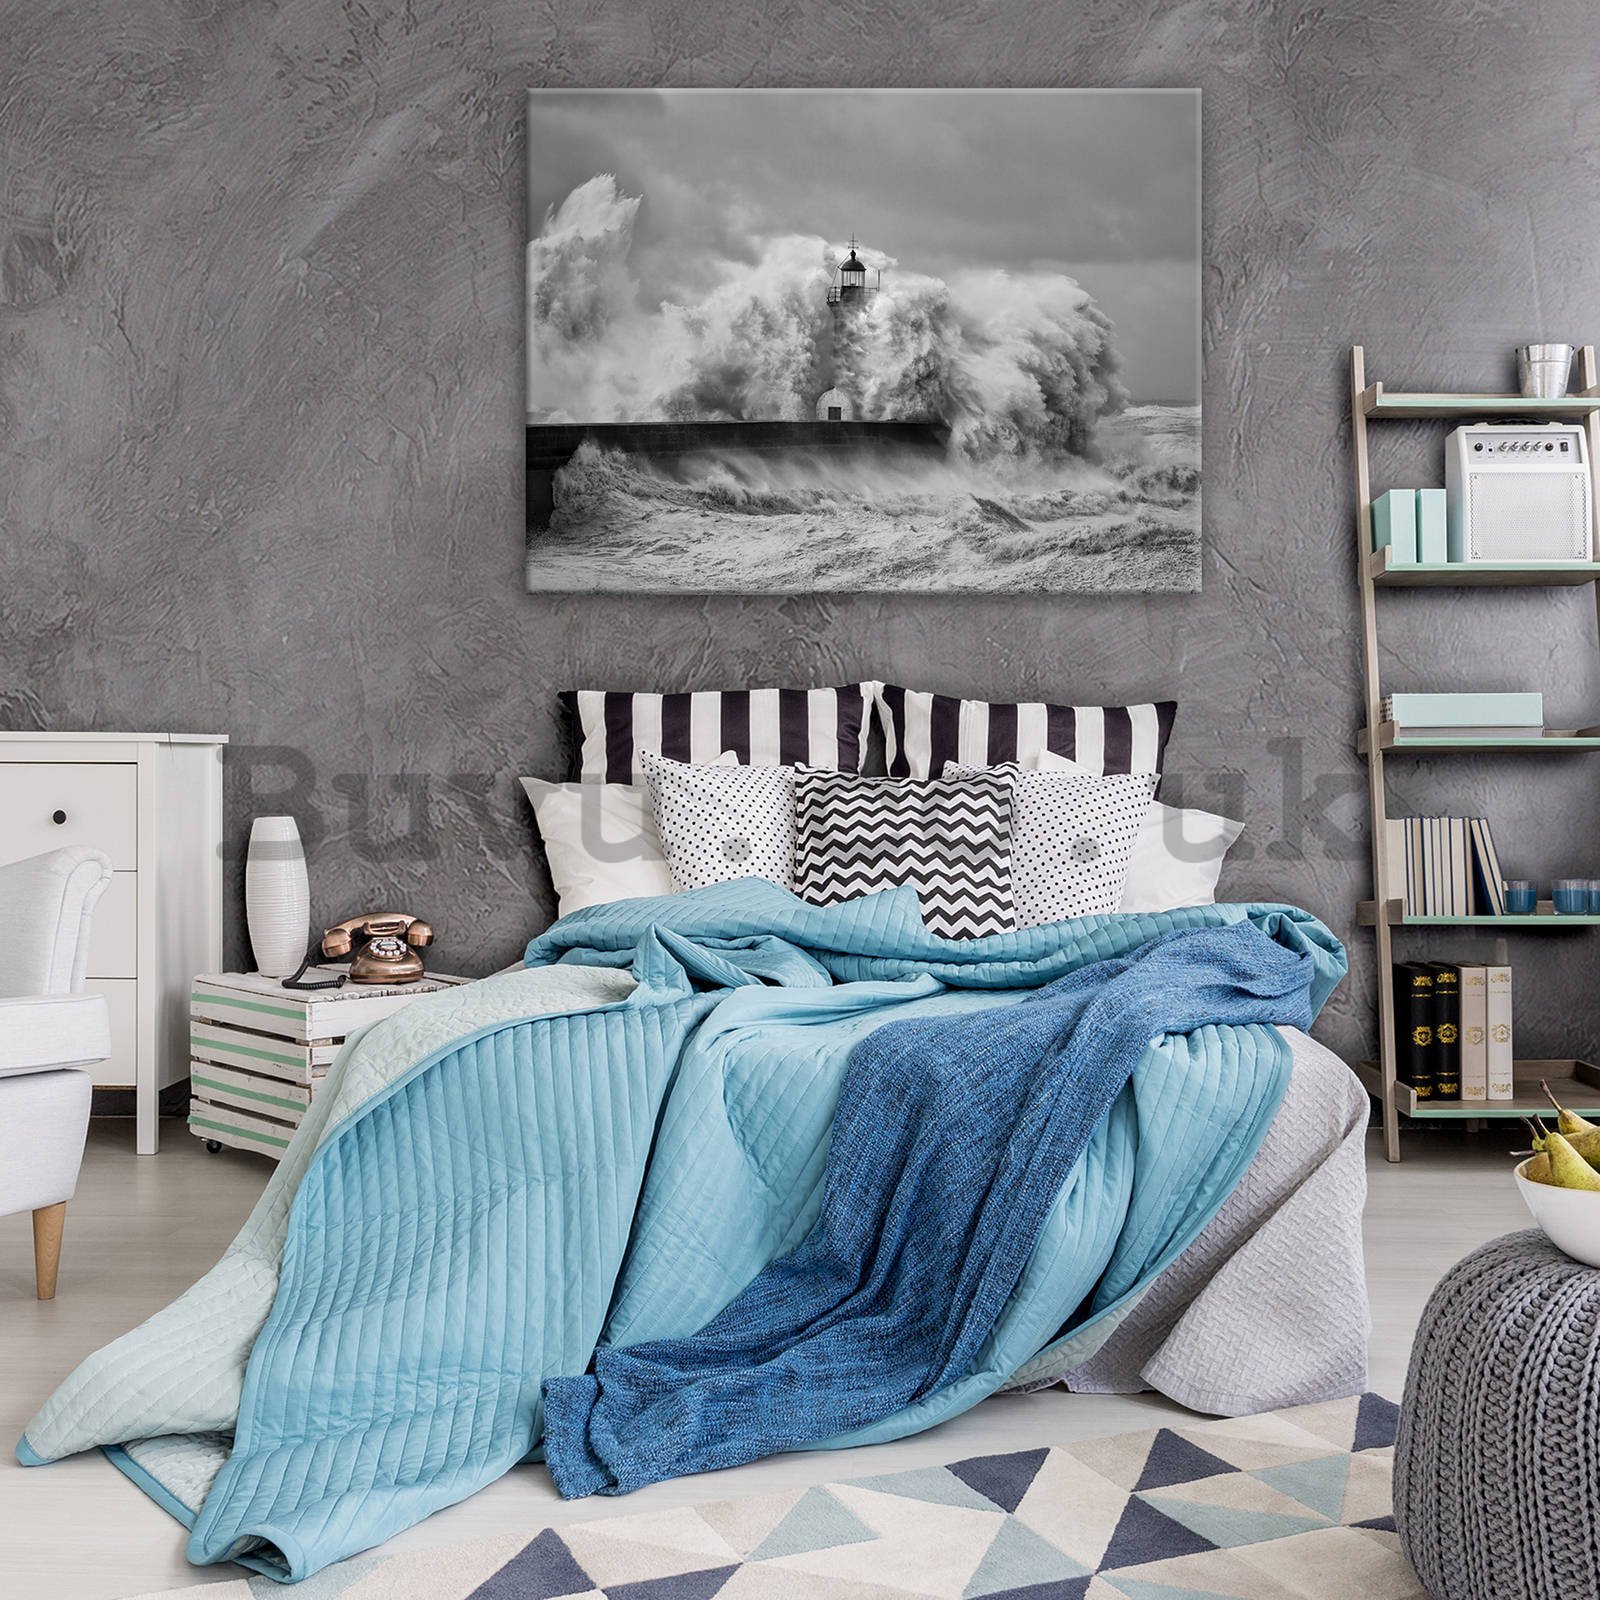 Painting on canvas: Storm wave (1) - 80x60 cm